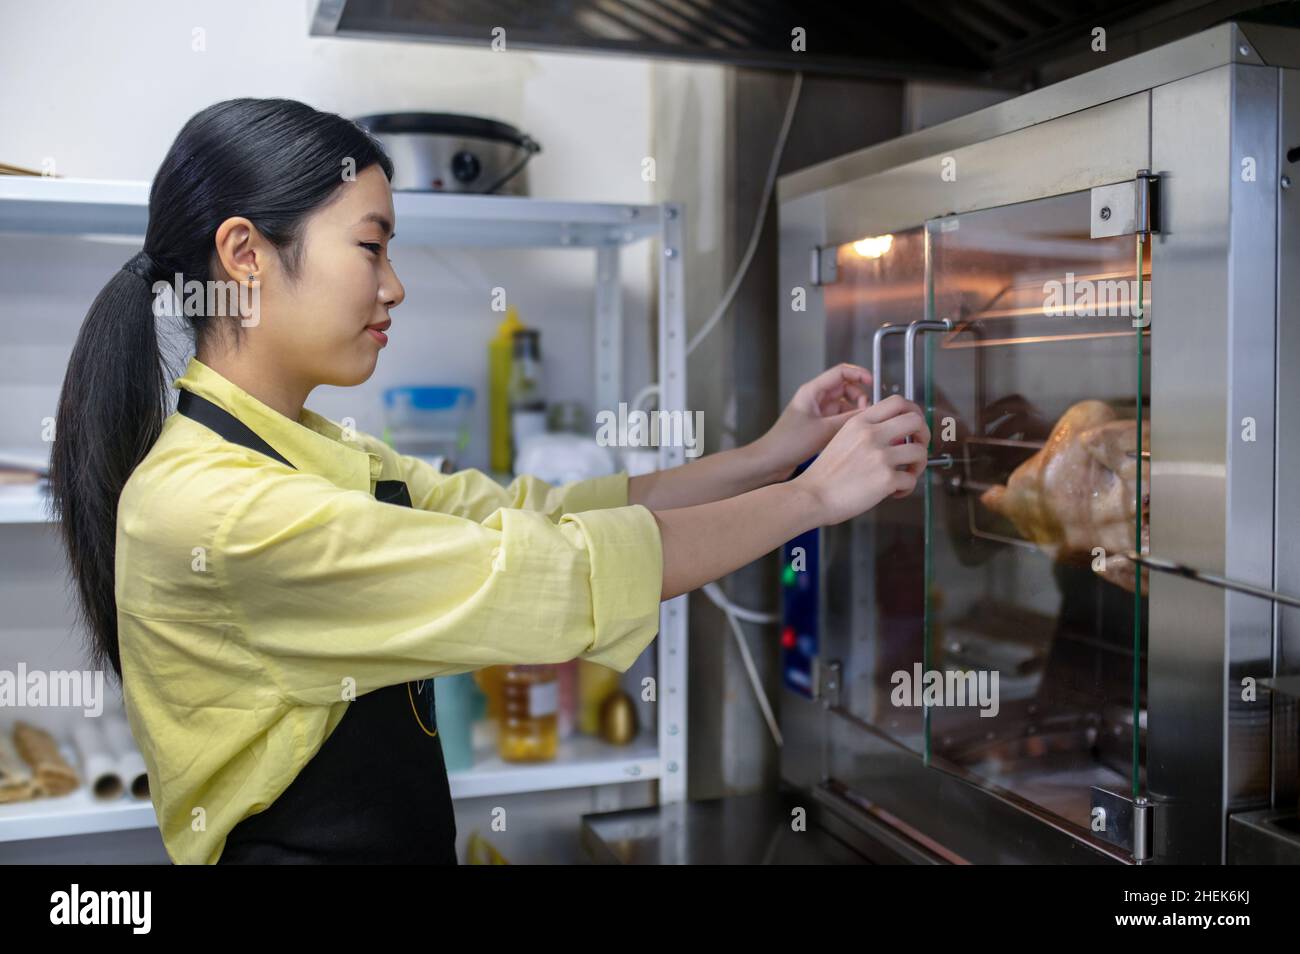 https://c8.alamy.com/comp/2HEK6KJ/young-asian-woman-working-in-the-kitchen-and-regulating-ovens-temperature-2HEK6KJ.jpg